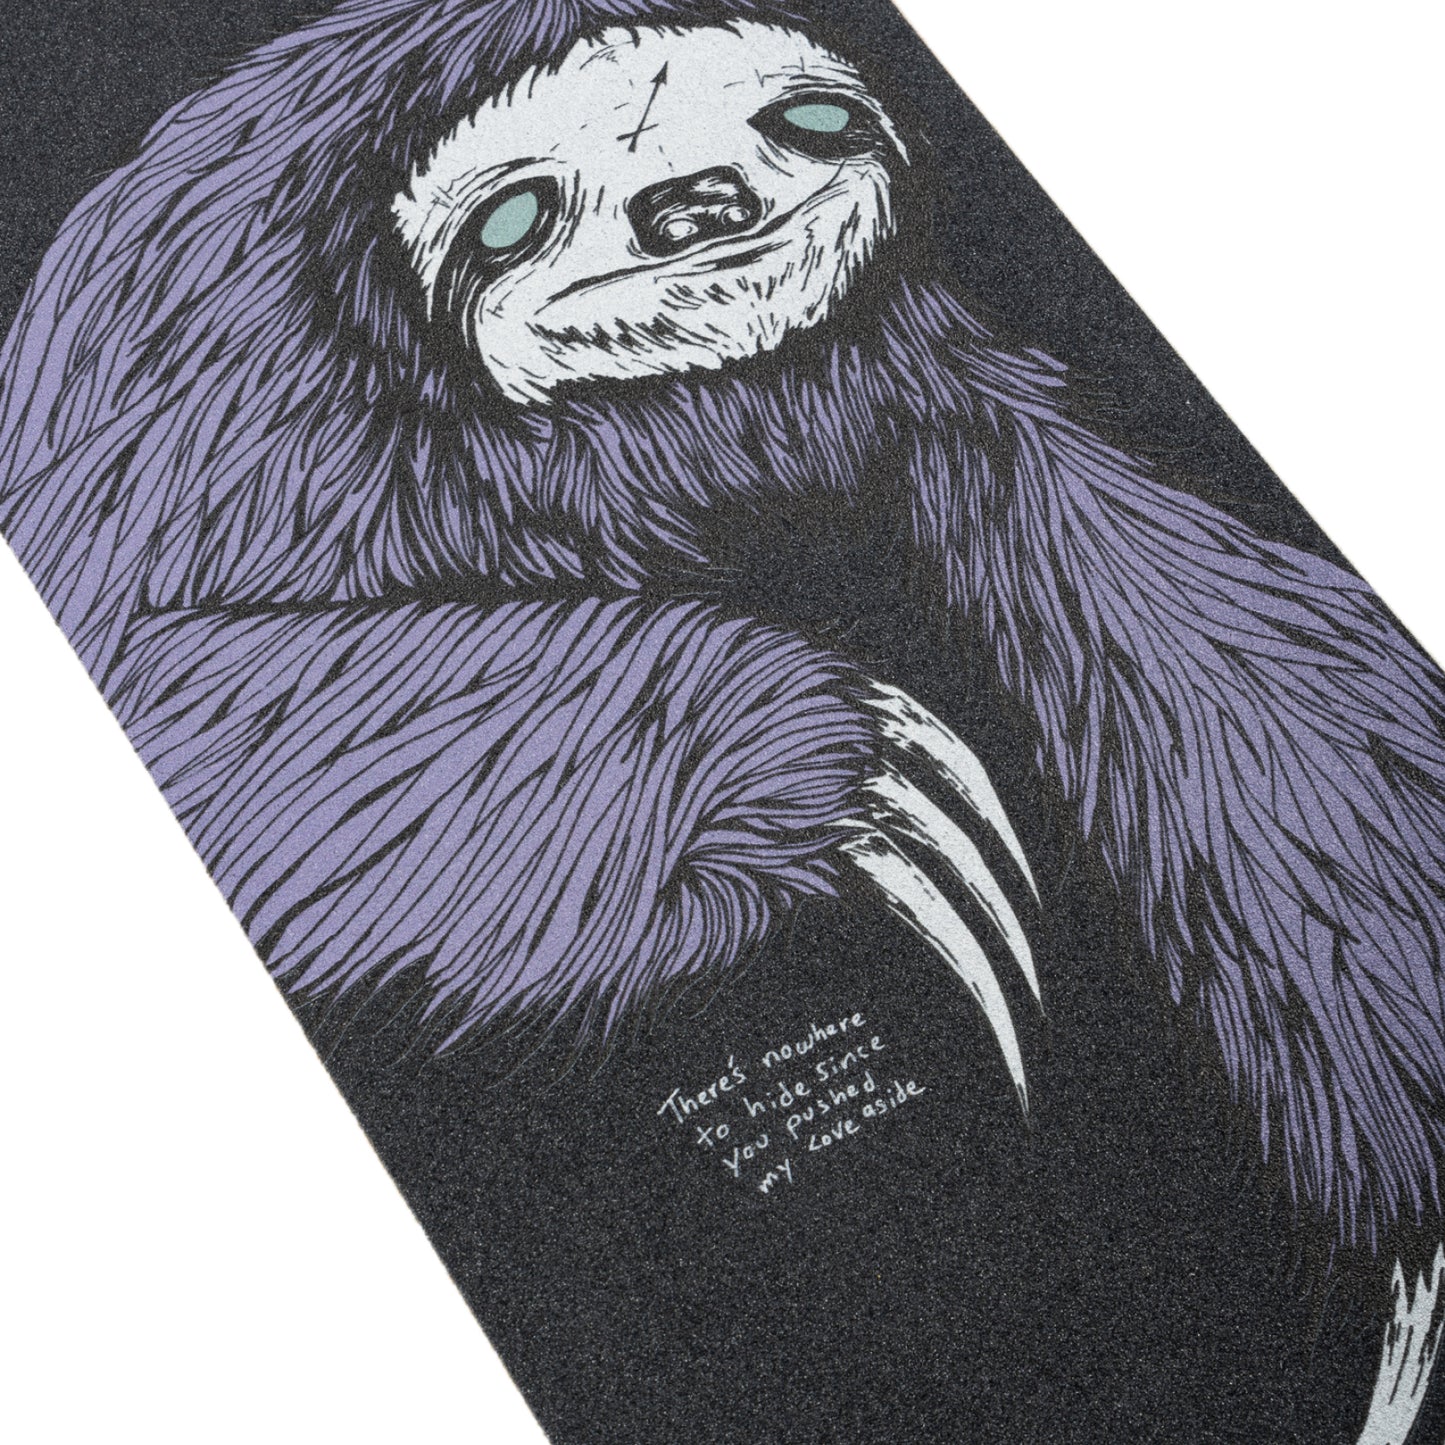 Welcome Sloth Grip Tape Sheet 9"